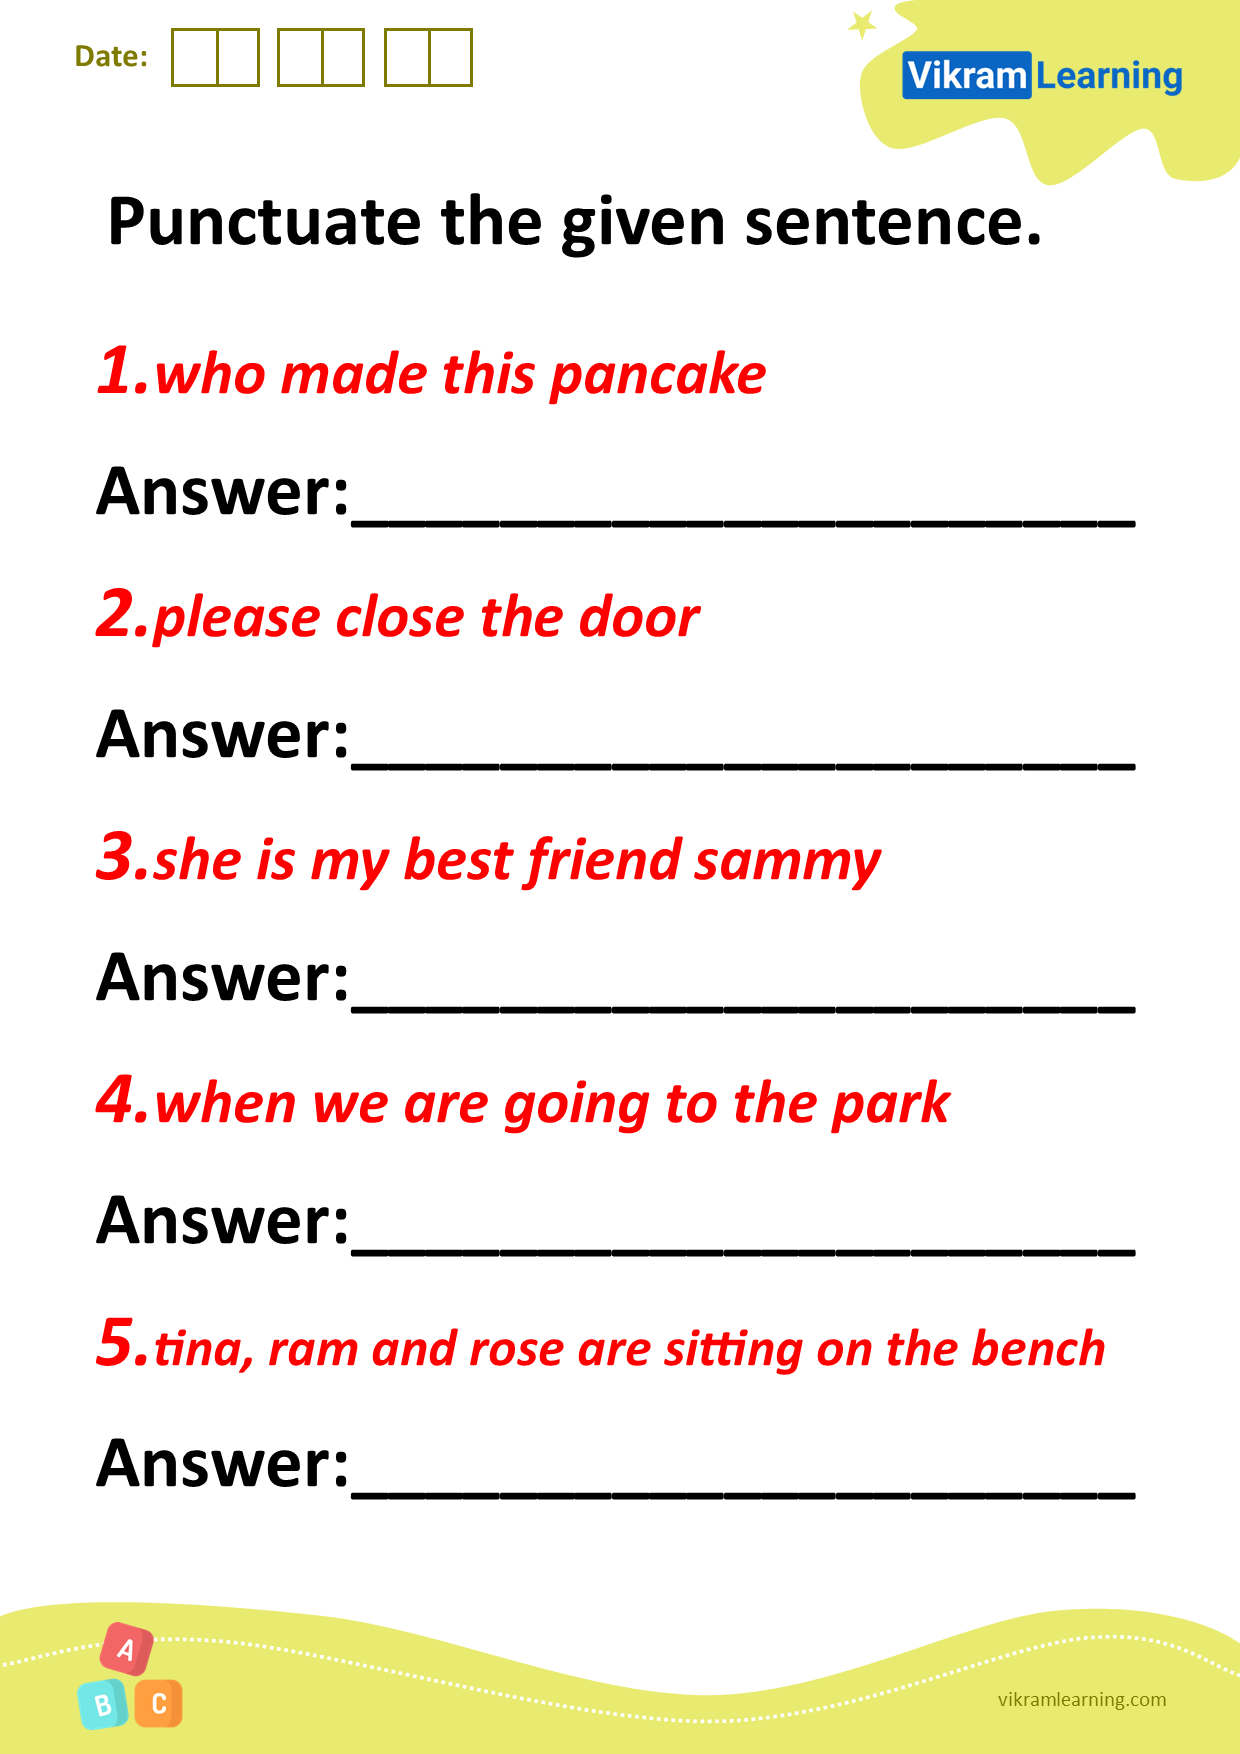 Download punctuate the given sentence worksheets